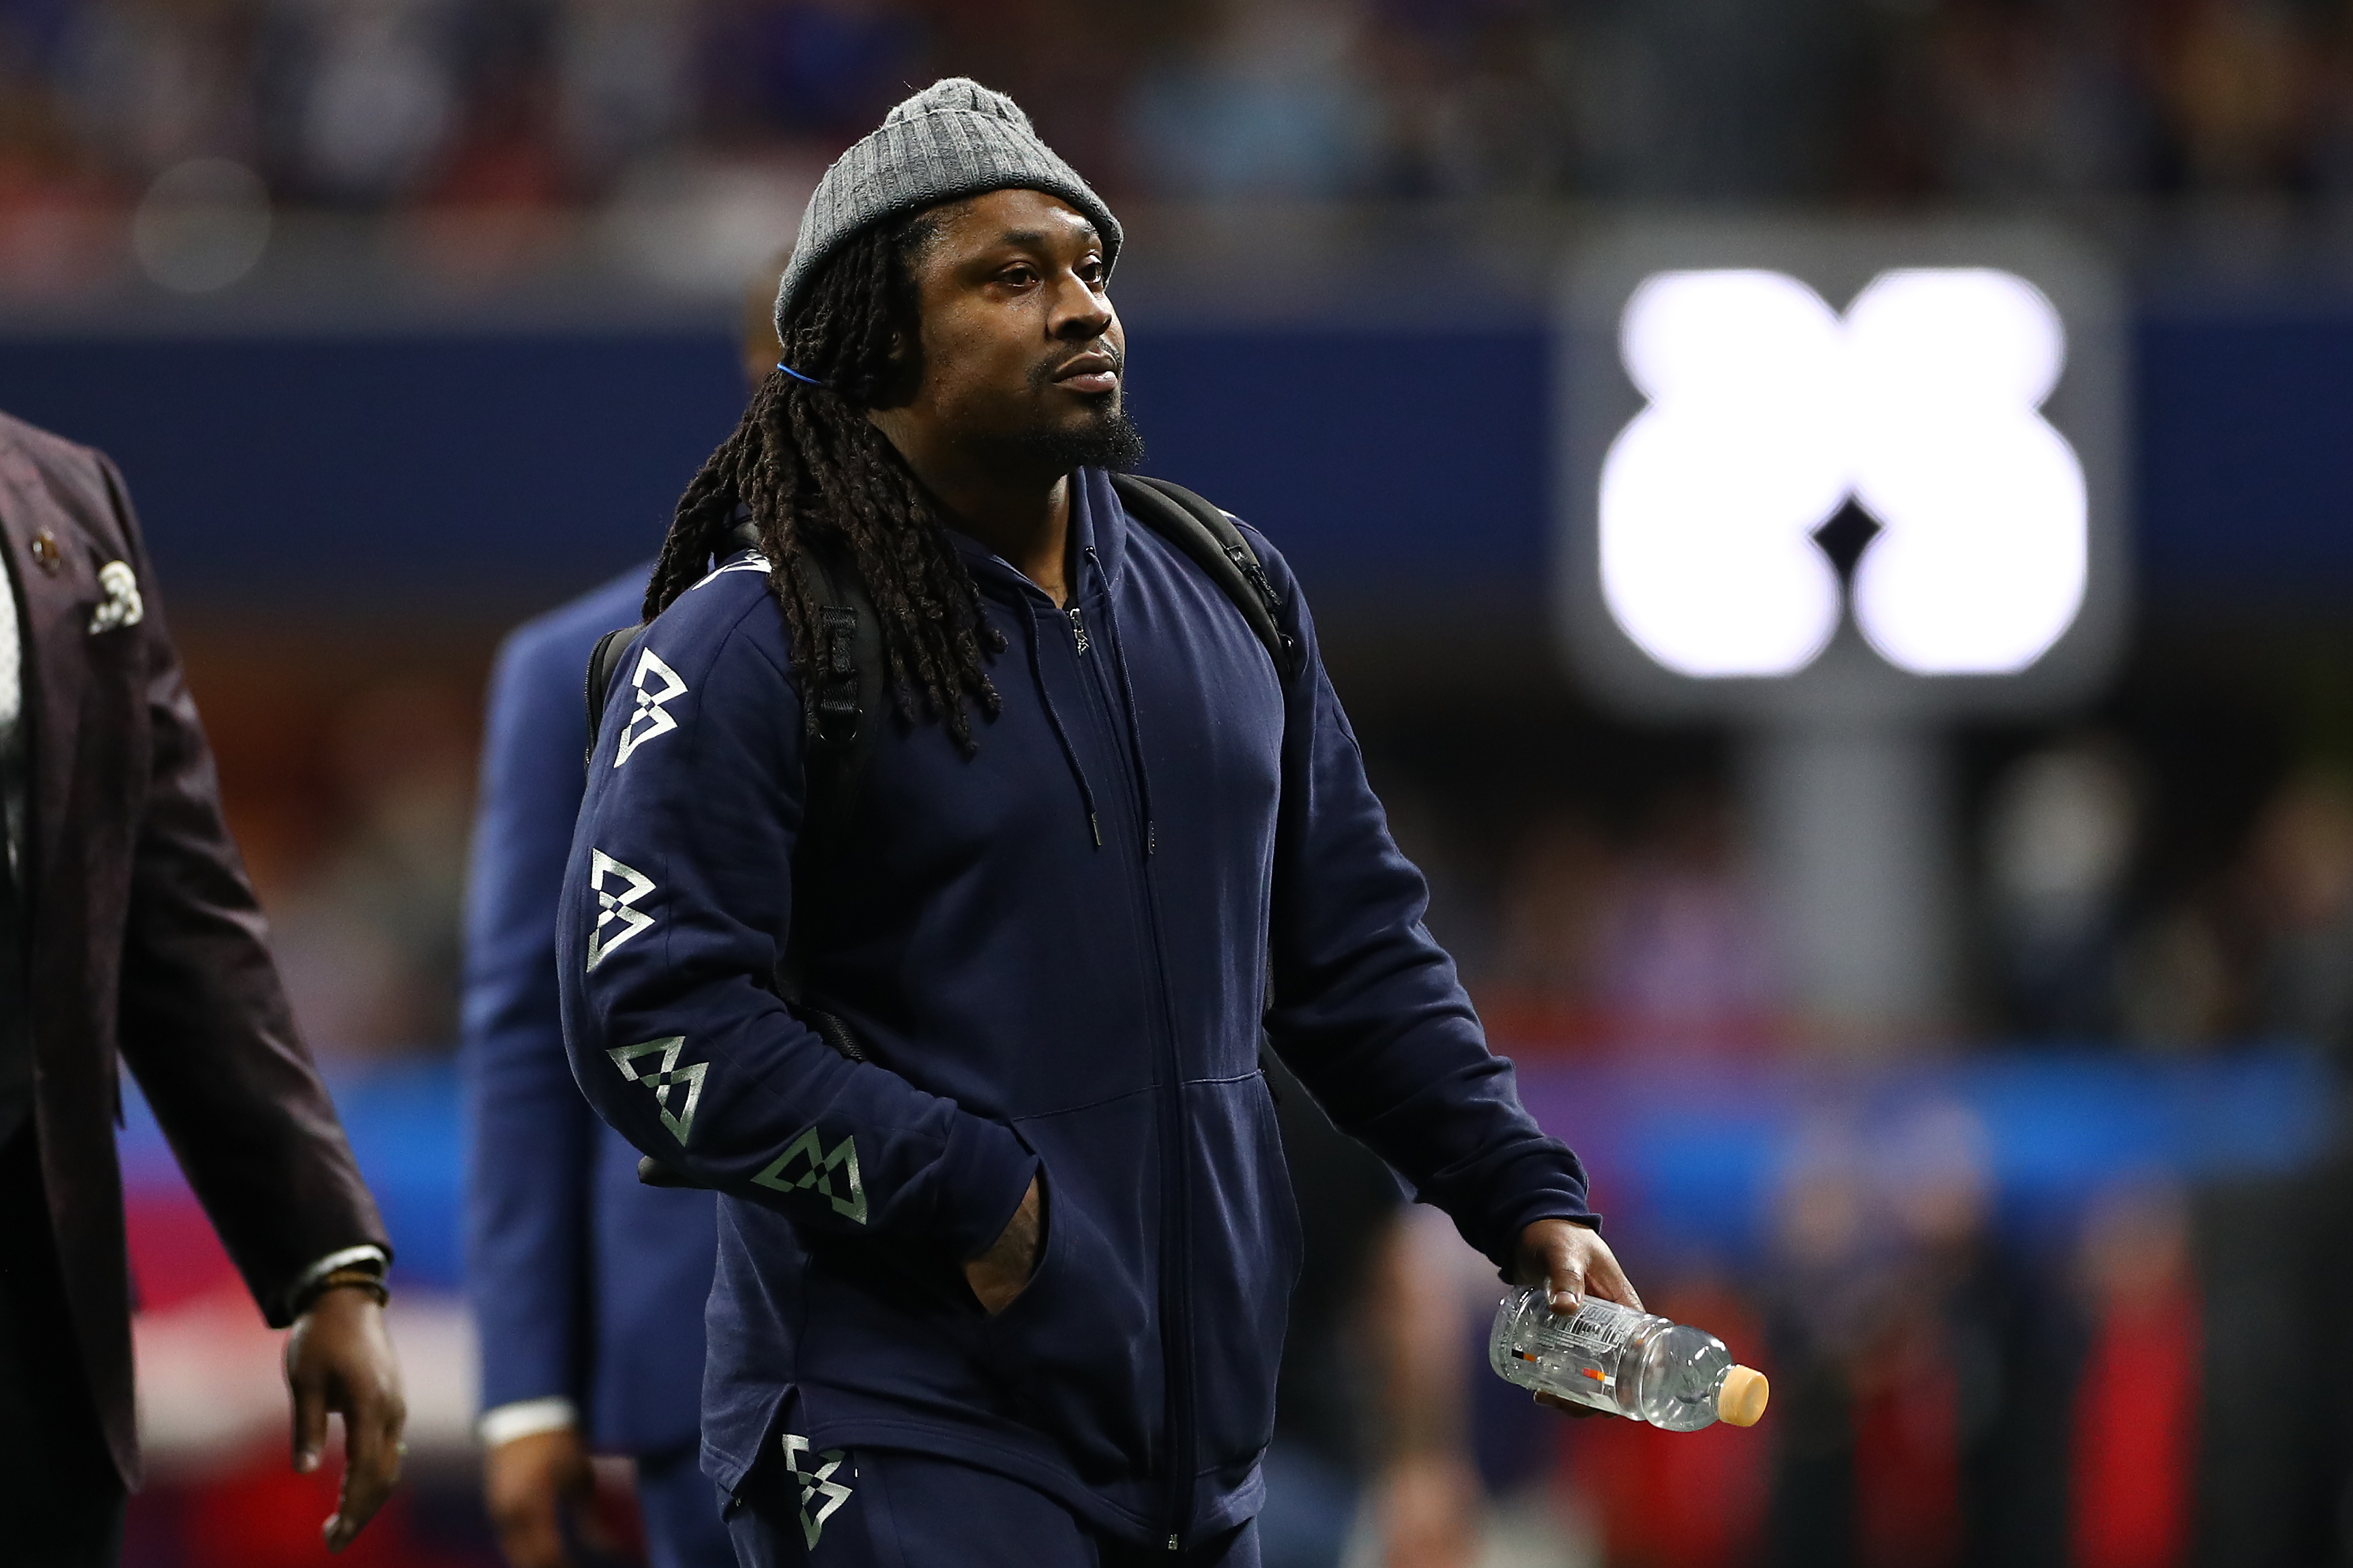 Marshawn Lynch of the Oakland Raiders arrives prior to Super Bowl LIII between the New England Patriots and the Los Angeles Rams at Mercedes-Benz Stadium on February 03, 2019 in Atlanta, Georgia. (Maddie Meyer&mdash;Getty Images)